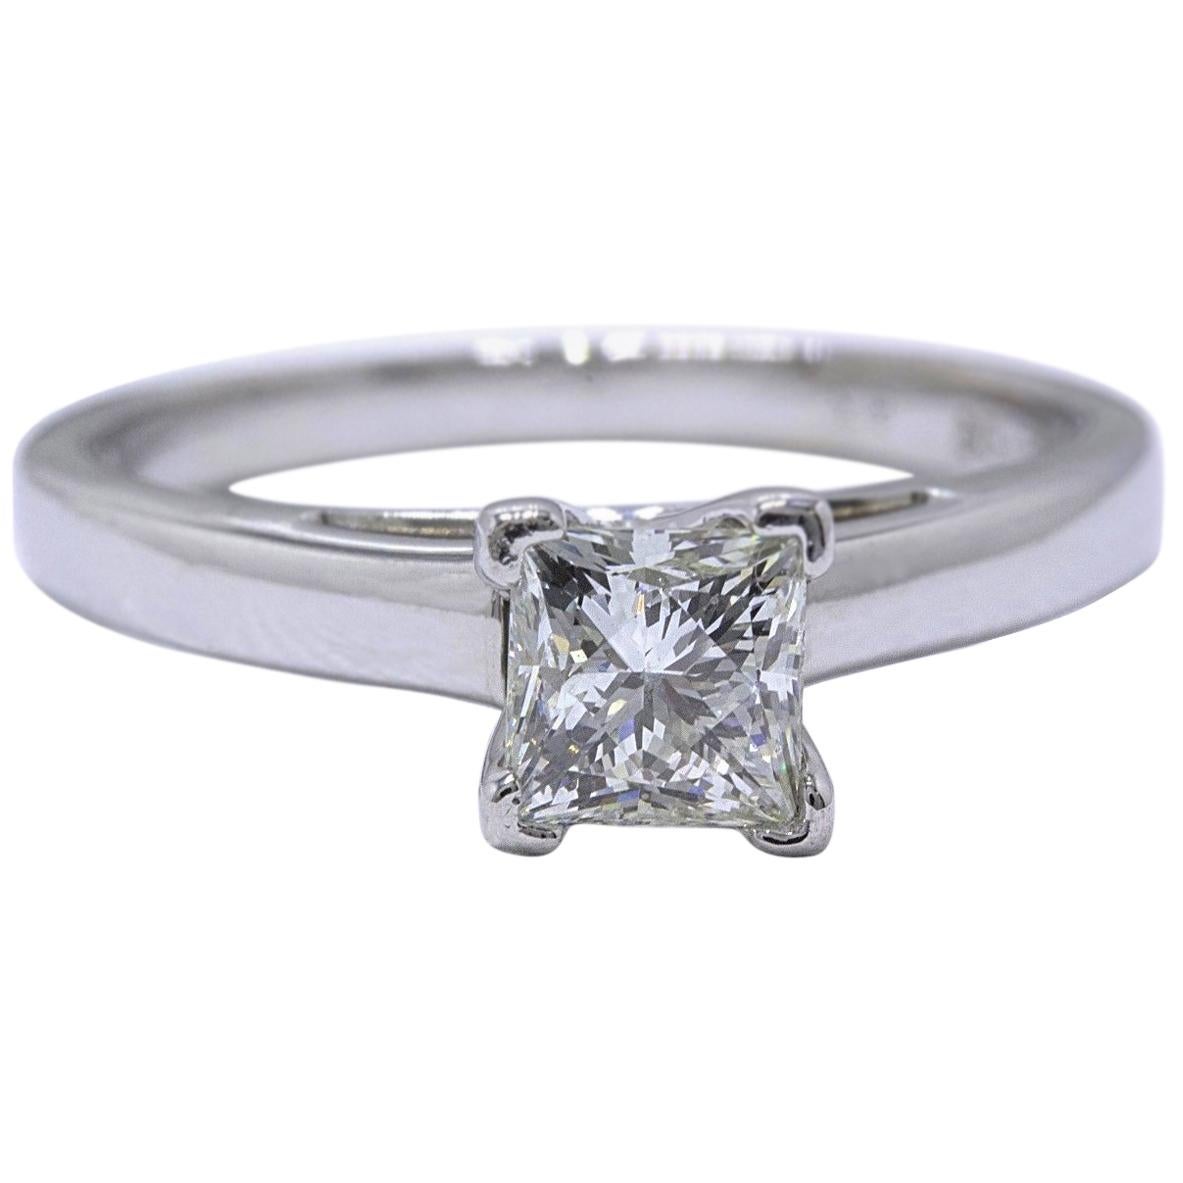 Leo Princess Cut Diamond Solitaire Engagement Ring 0.83 CT I SI1 14k White Gold